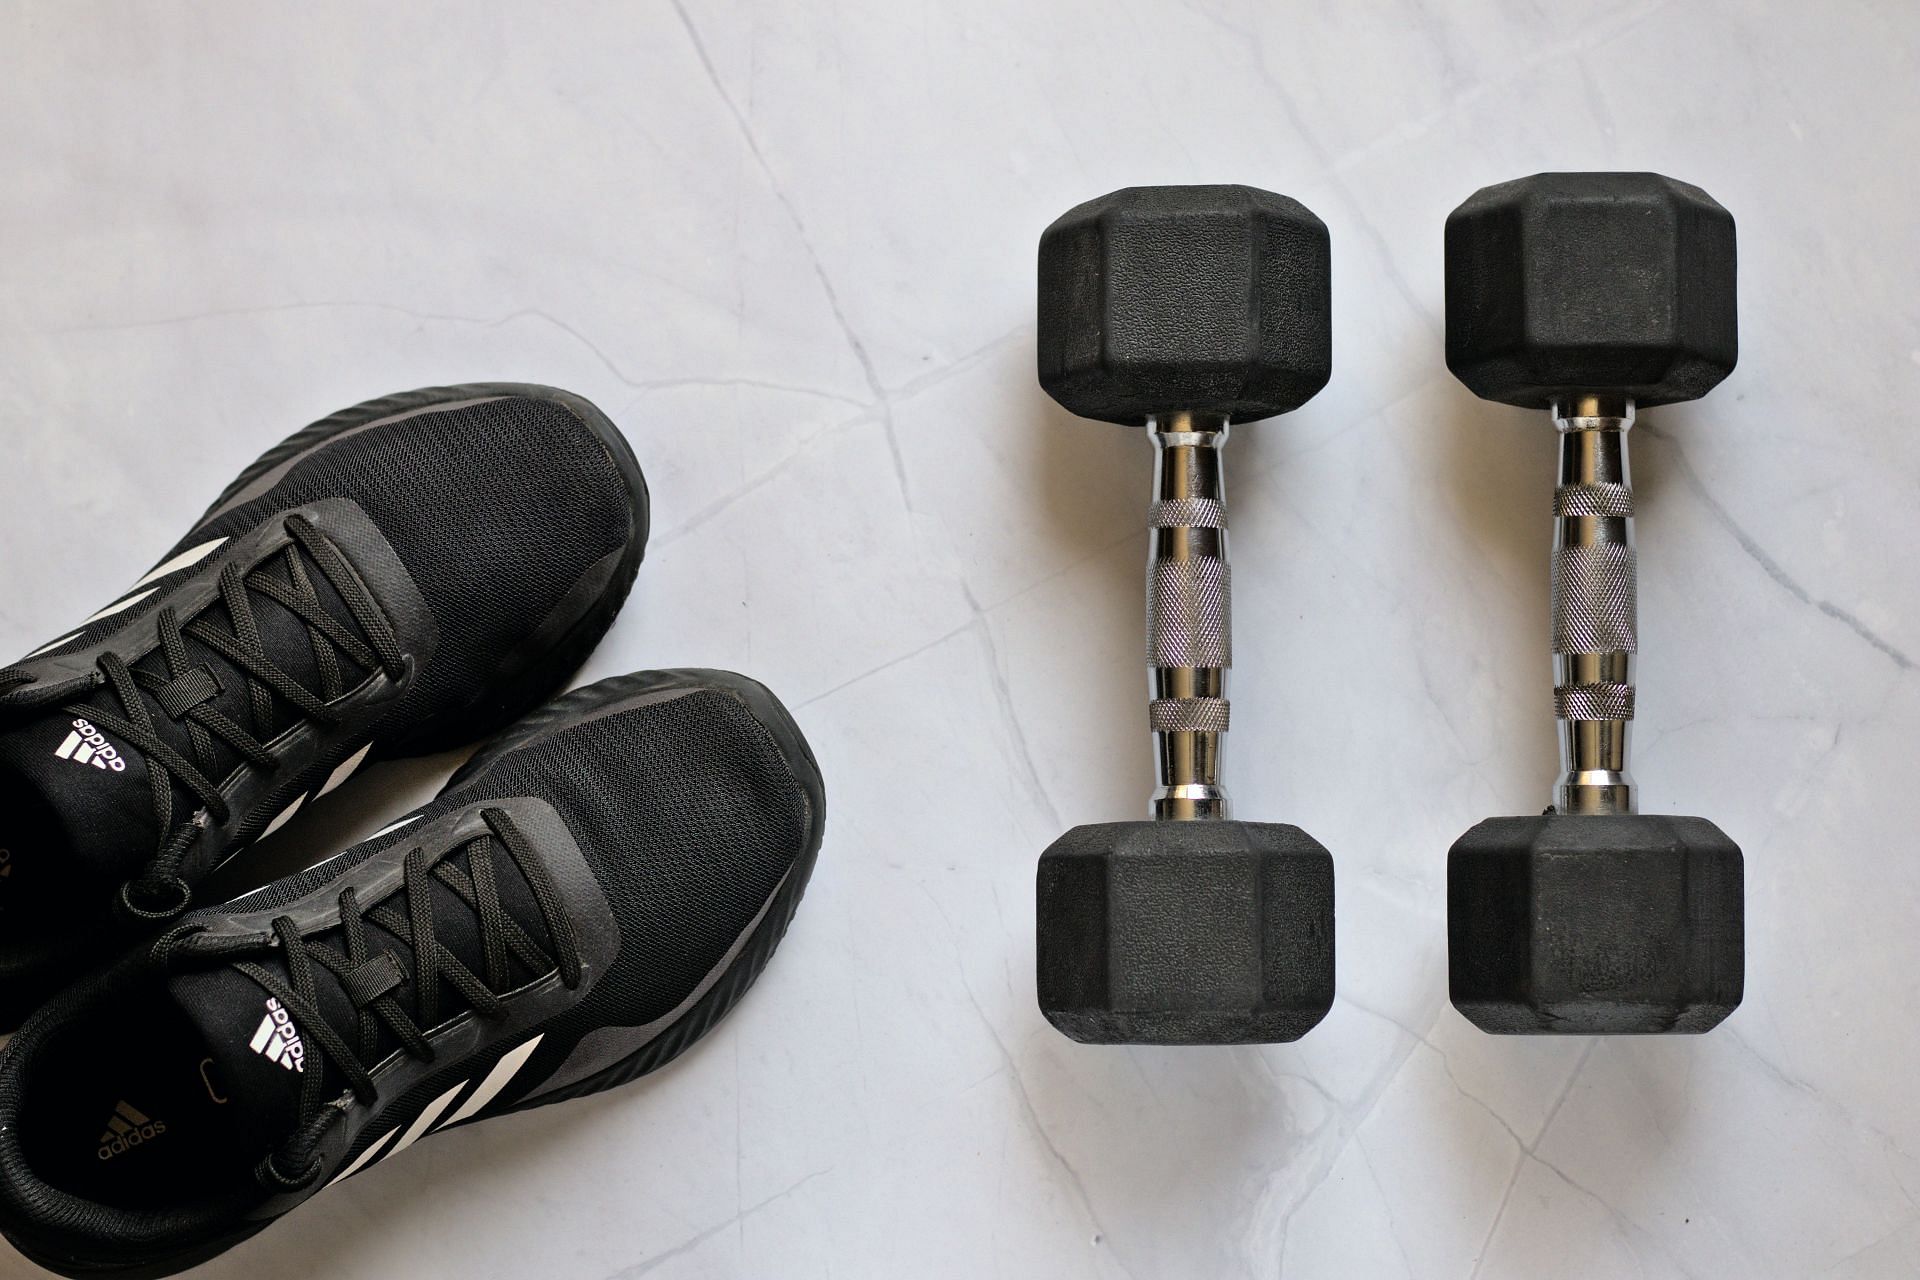 Dumbbell Sumo Squats strengthens your lower body muscles. (Image via Unsplash / VD Photography)